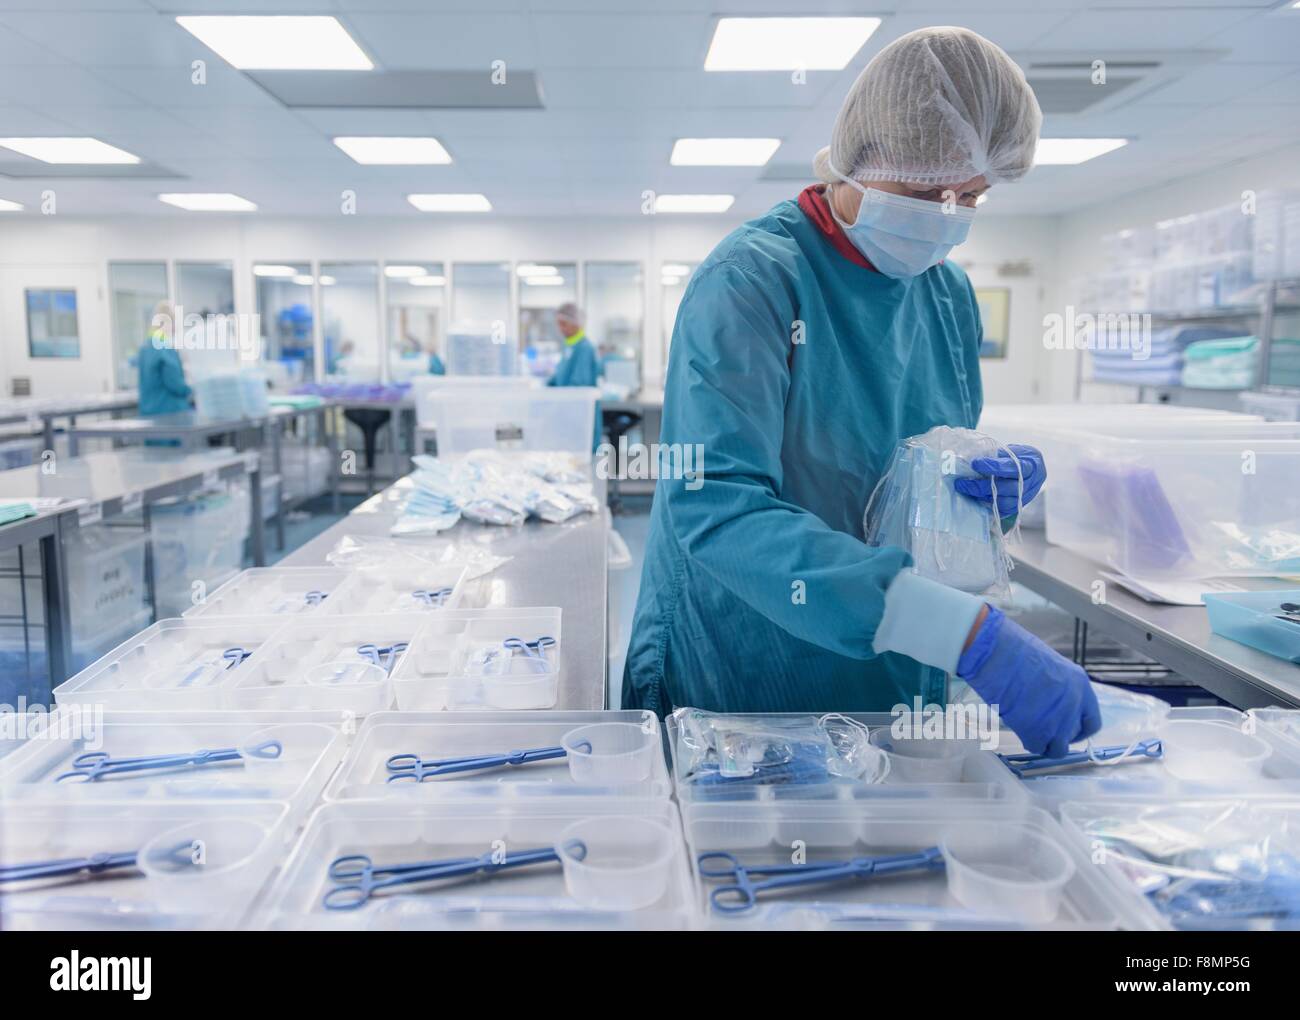 Worker packing surgical instruments in clean room of surgical instruments factory Stock Photo